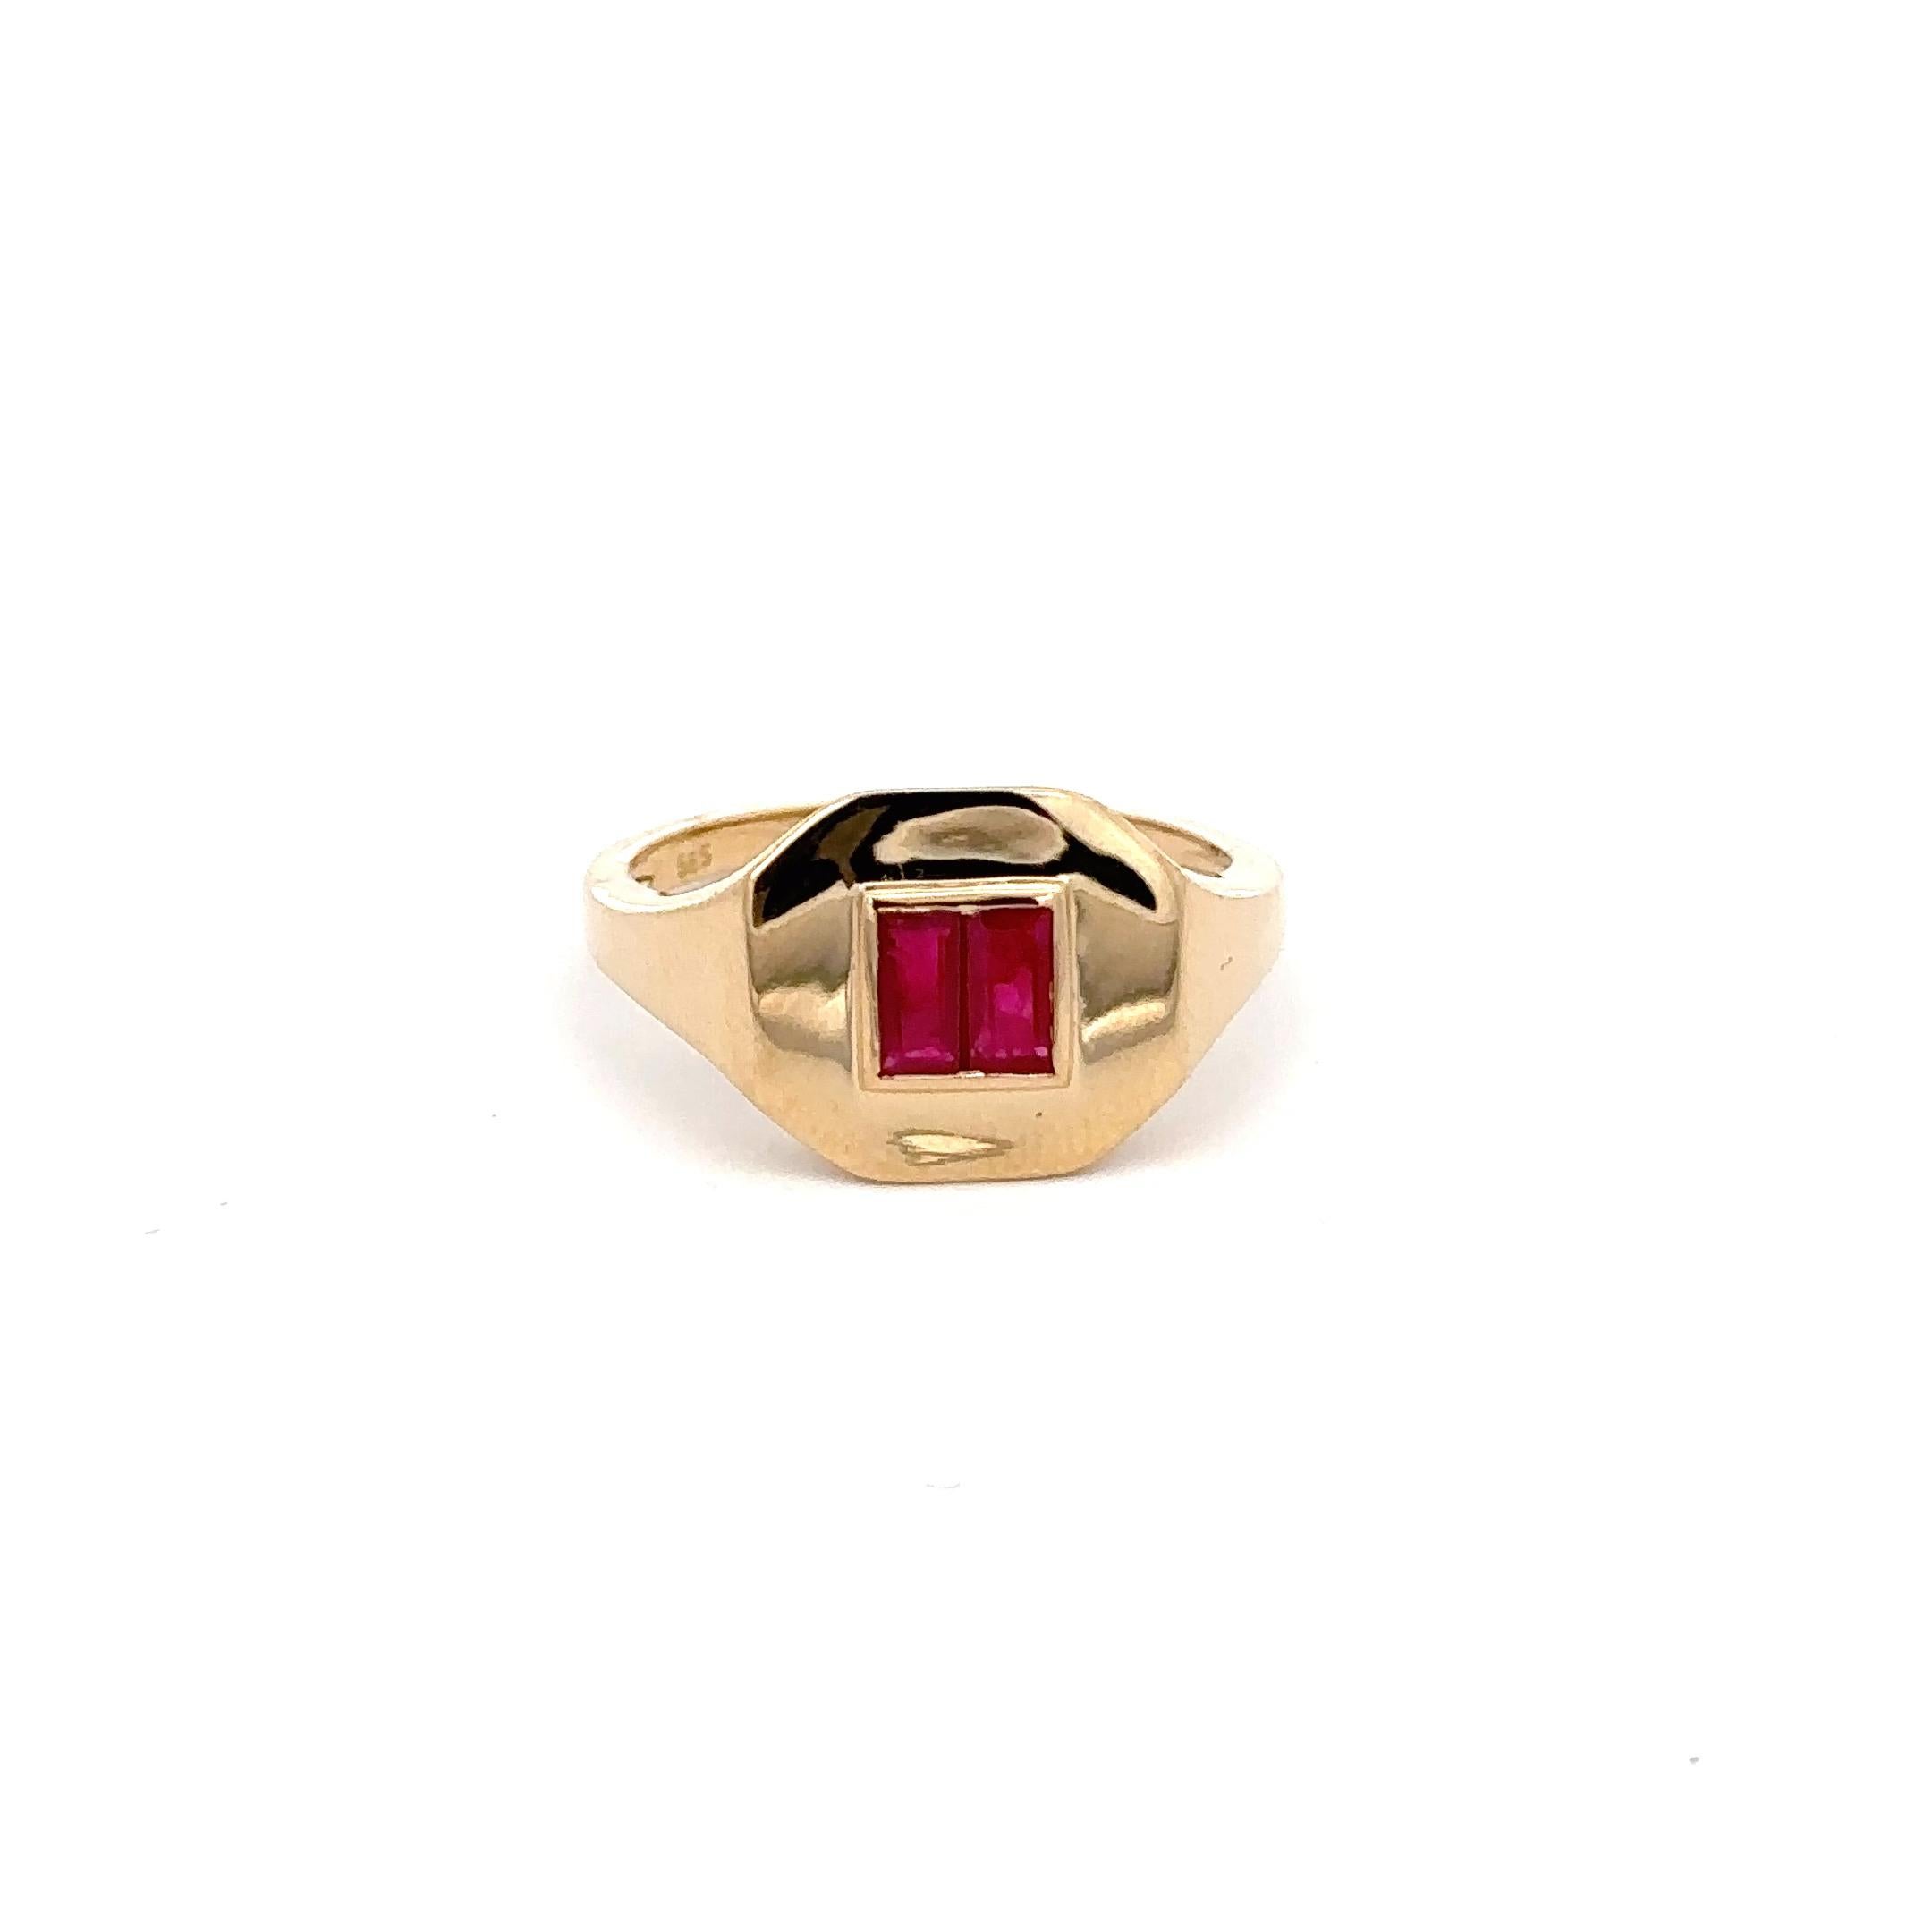 For Sale:  Baguette Cut Ruby Gemstone Unisex Signet Ring 14kt Solid Yellow Gold 8